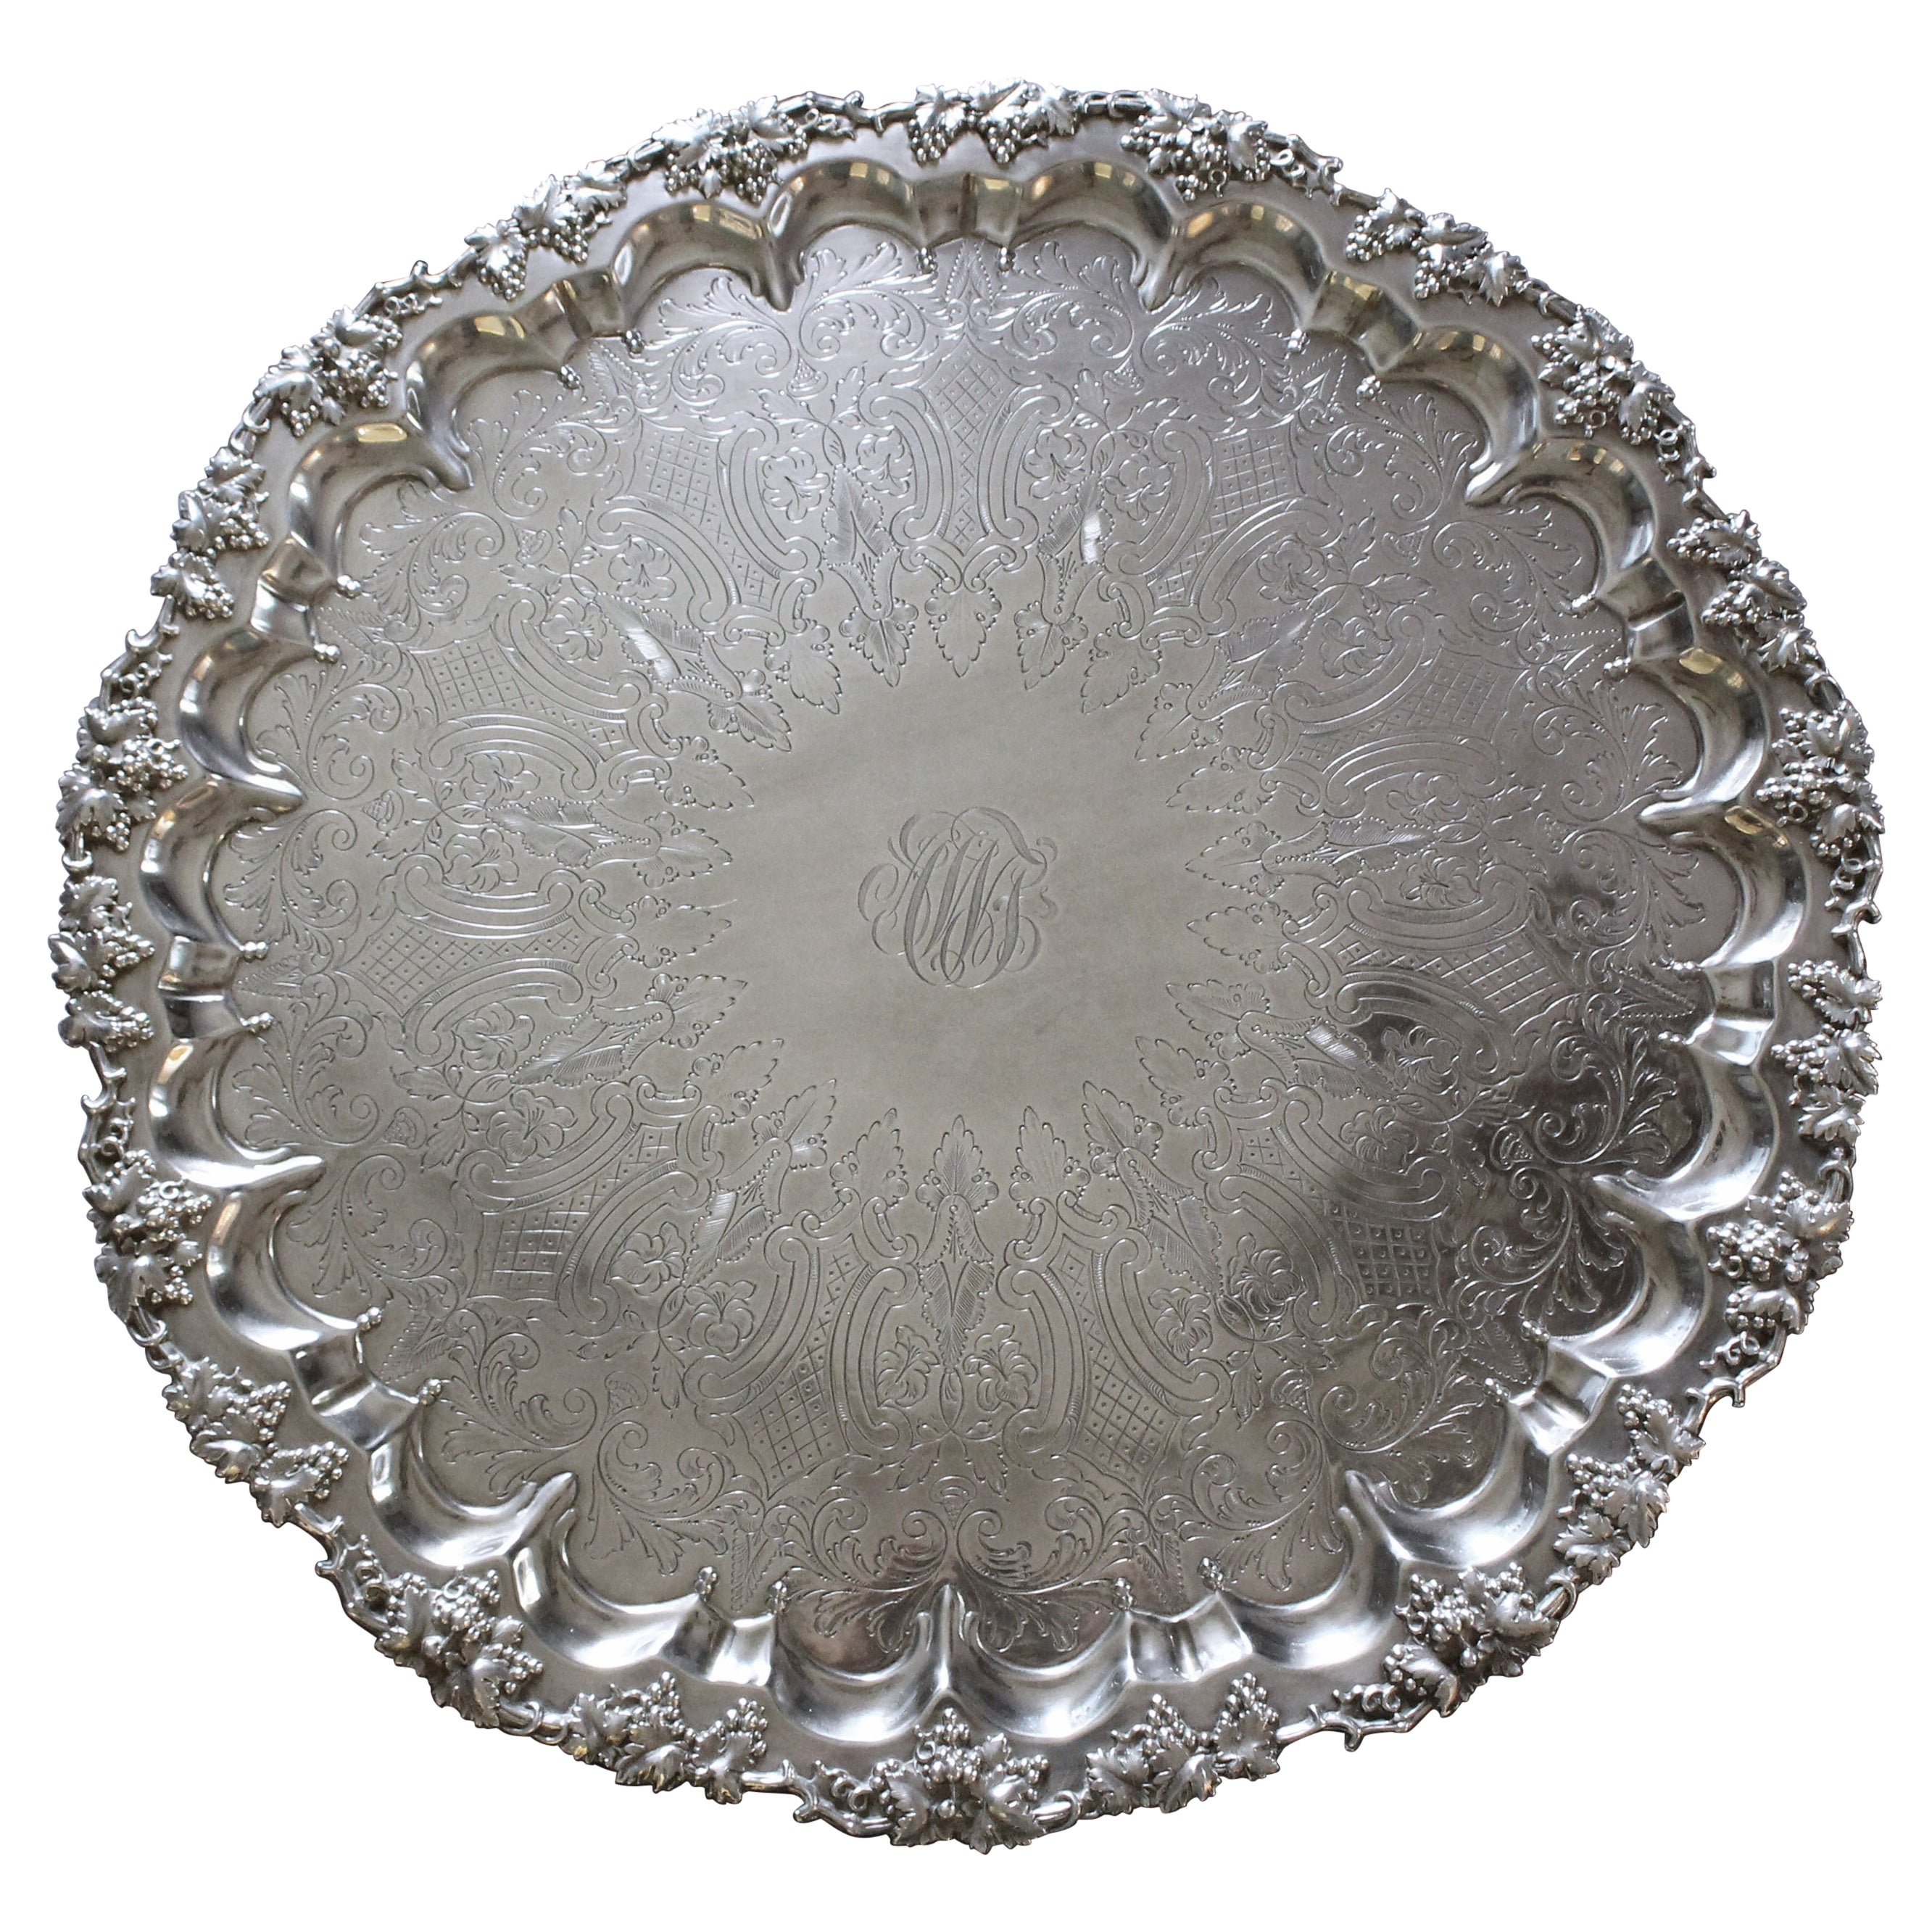 c. 1920 Electroplated Nickel Silver Salver by S.B. & Co. For Sale